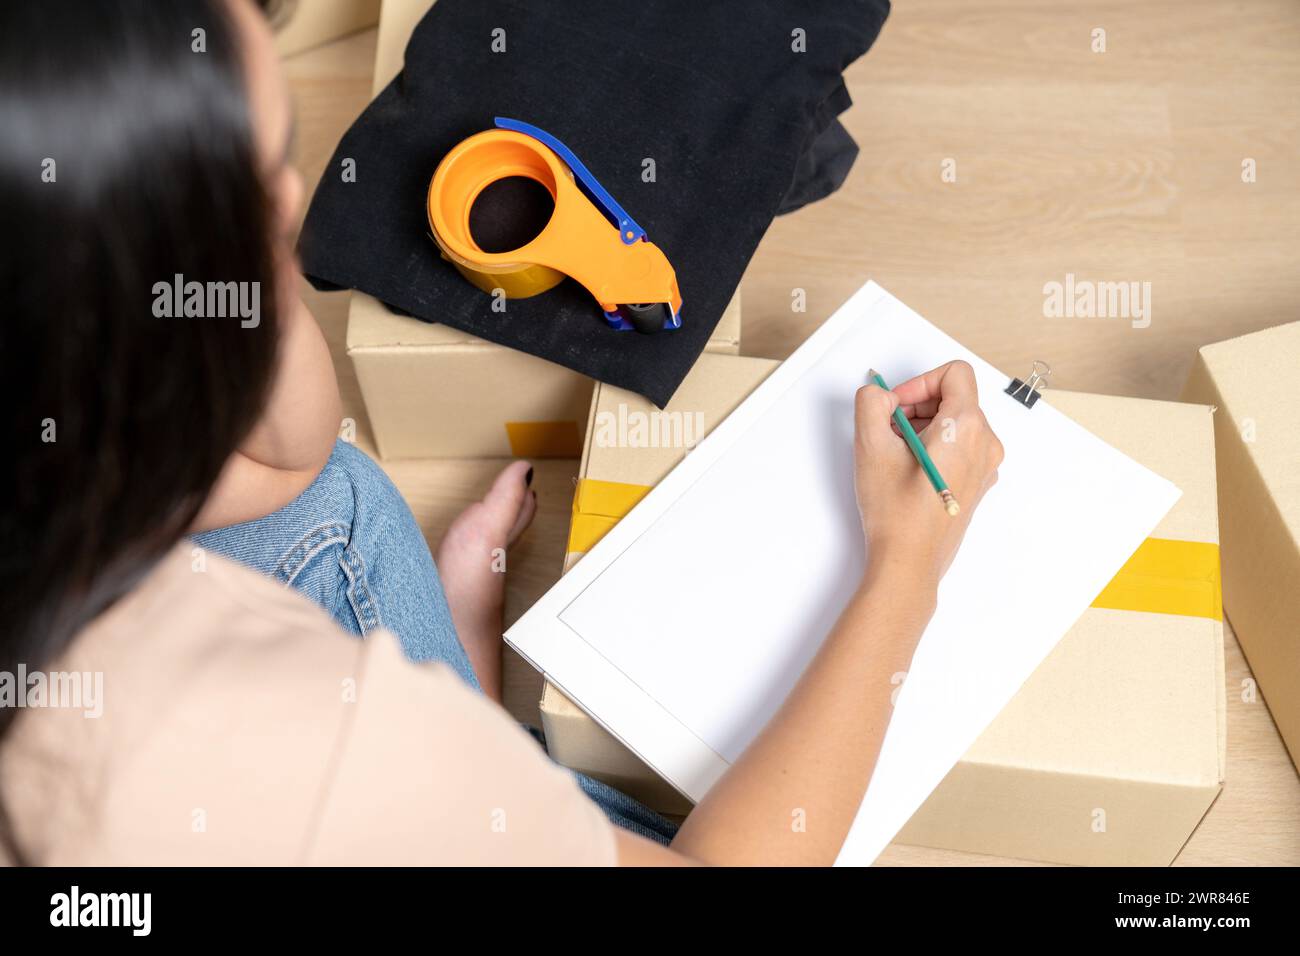 The young woman is checking a list of household items in a paper box to prepare for moving into a new hous Stock Photo